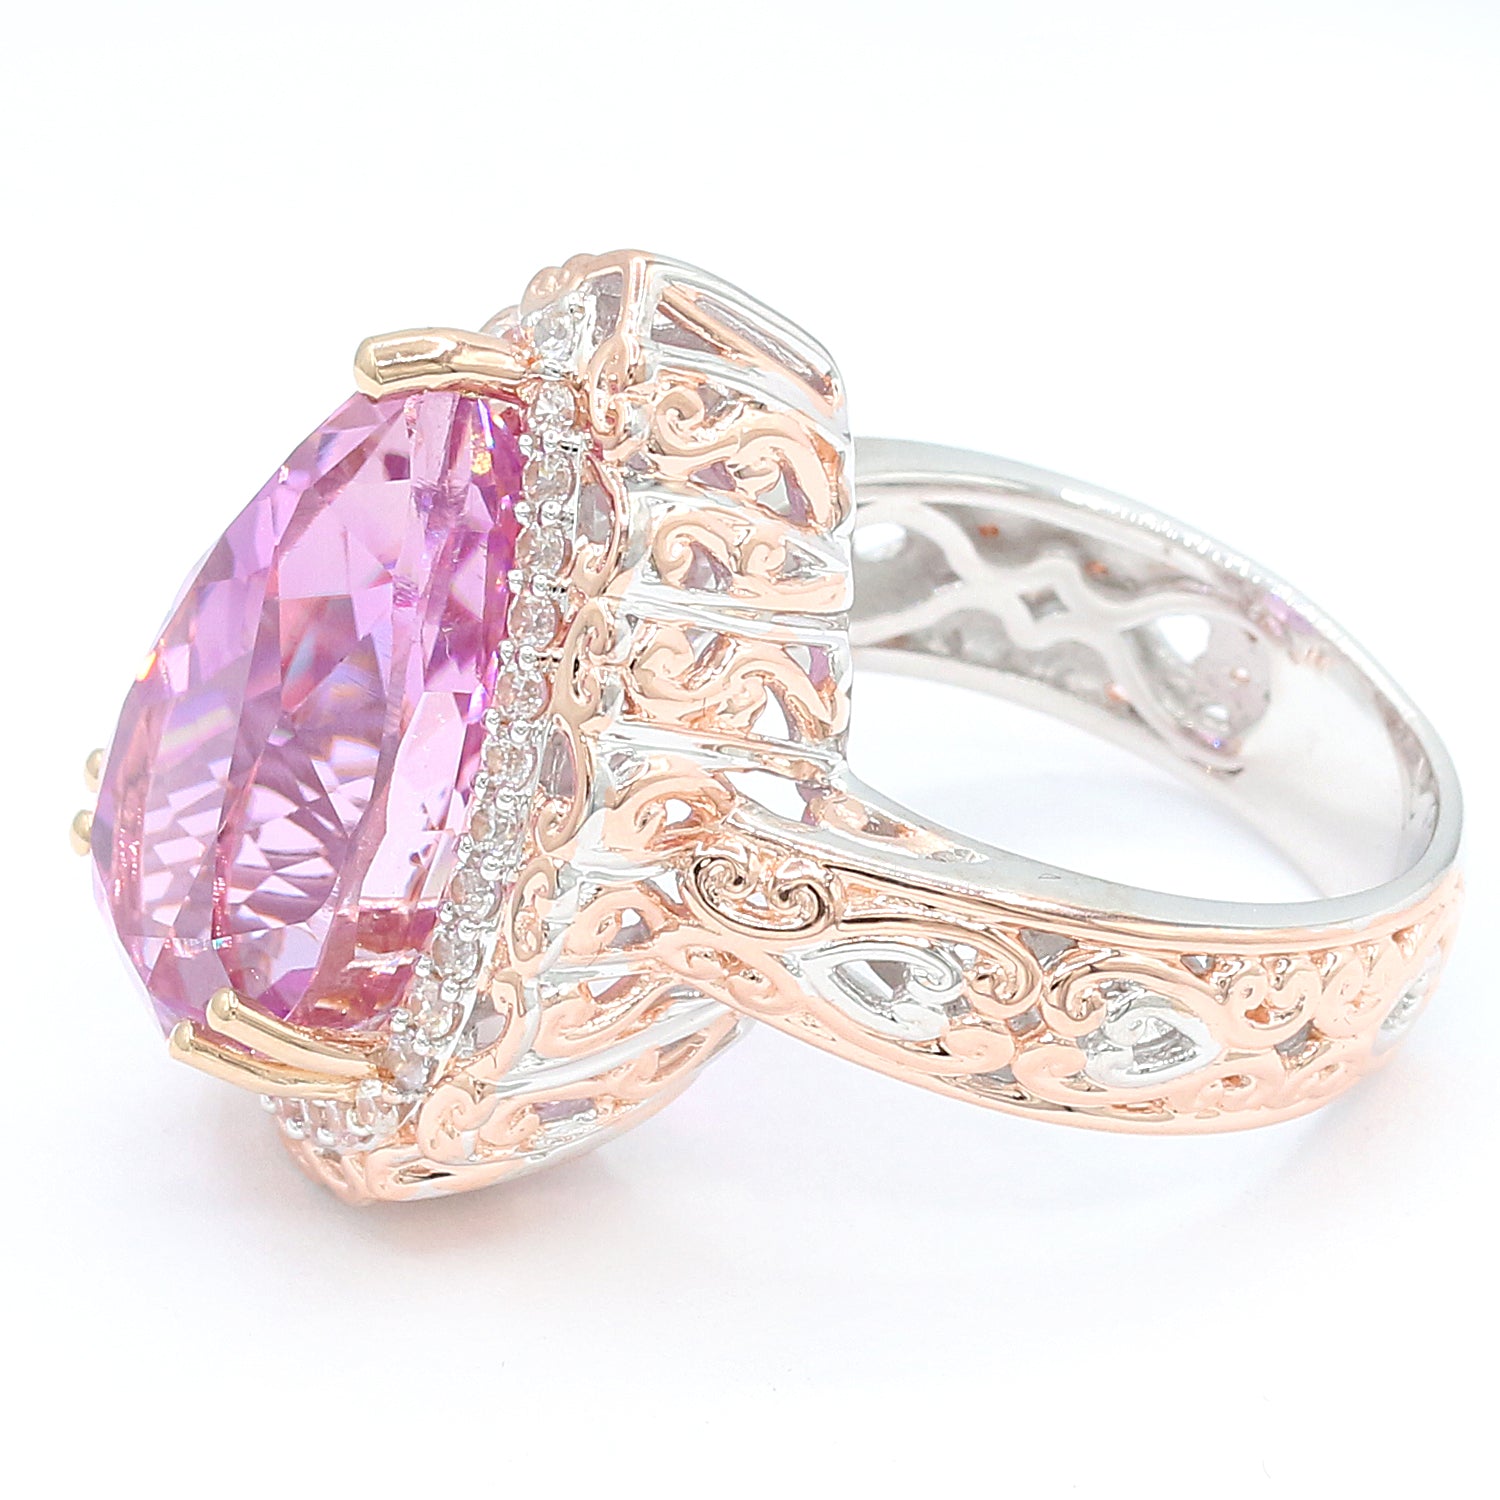 Limited Edition Gems en Vogue Luxe One-of-a-Kind 16.87ctw Kunzite & White Zircon Ring